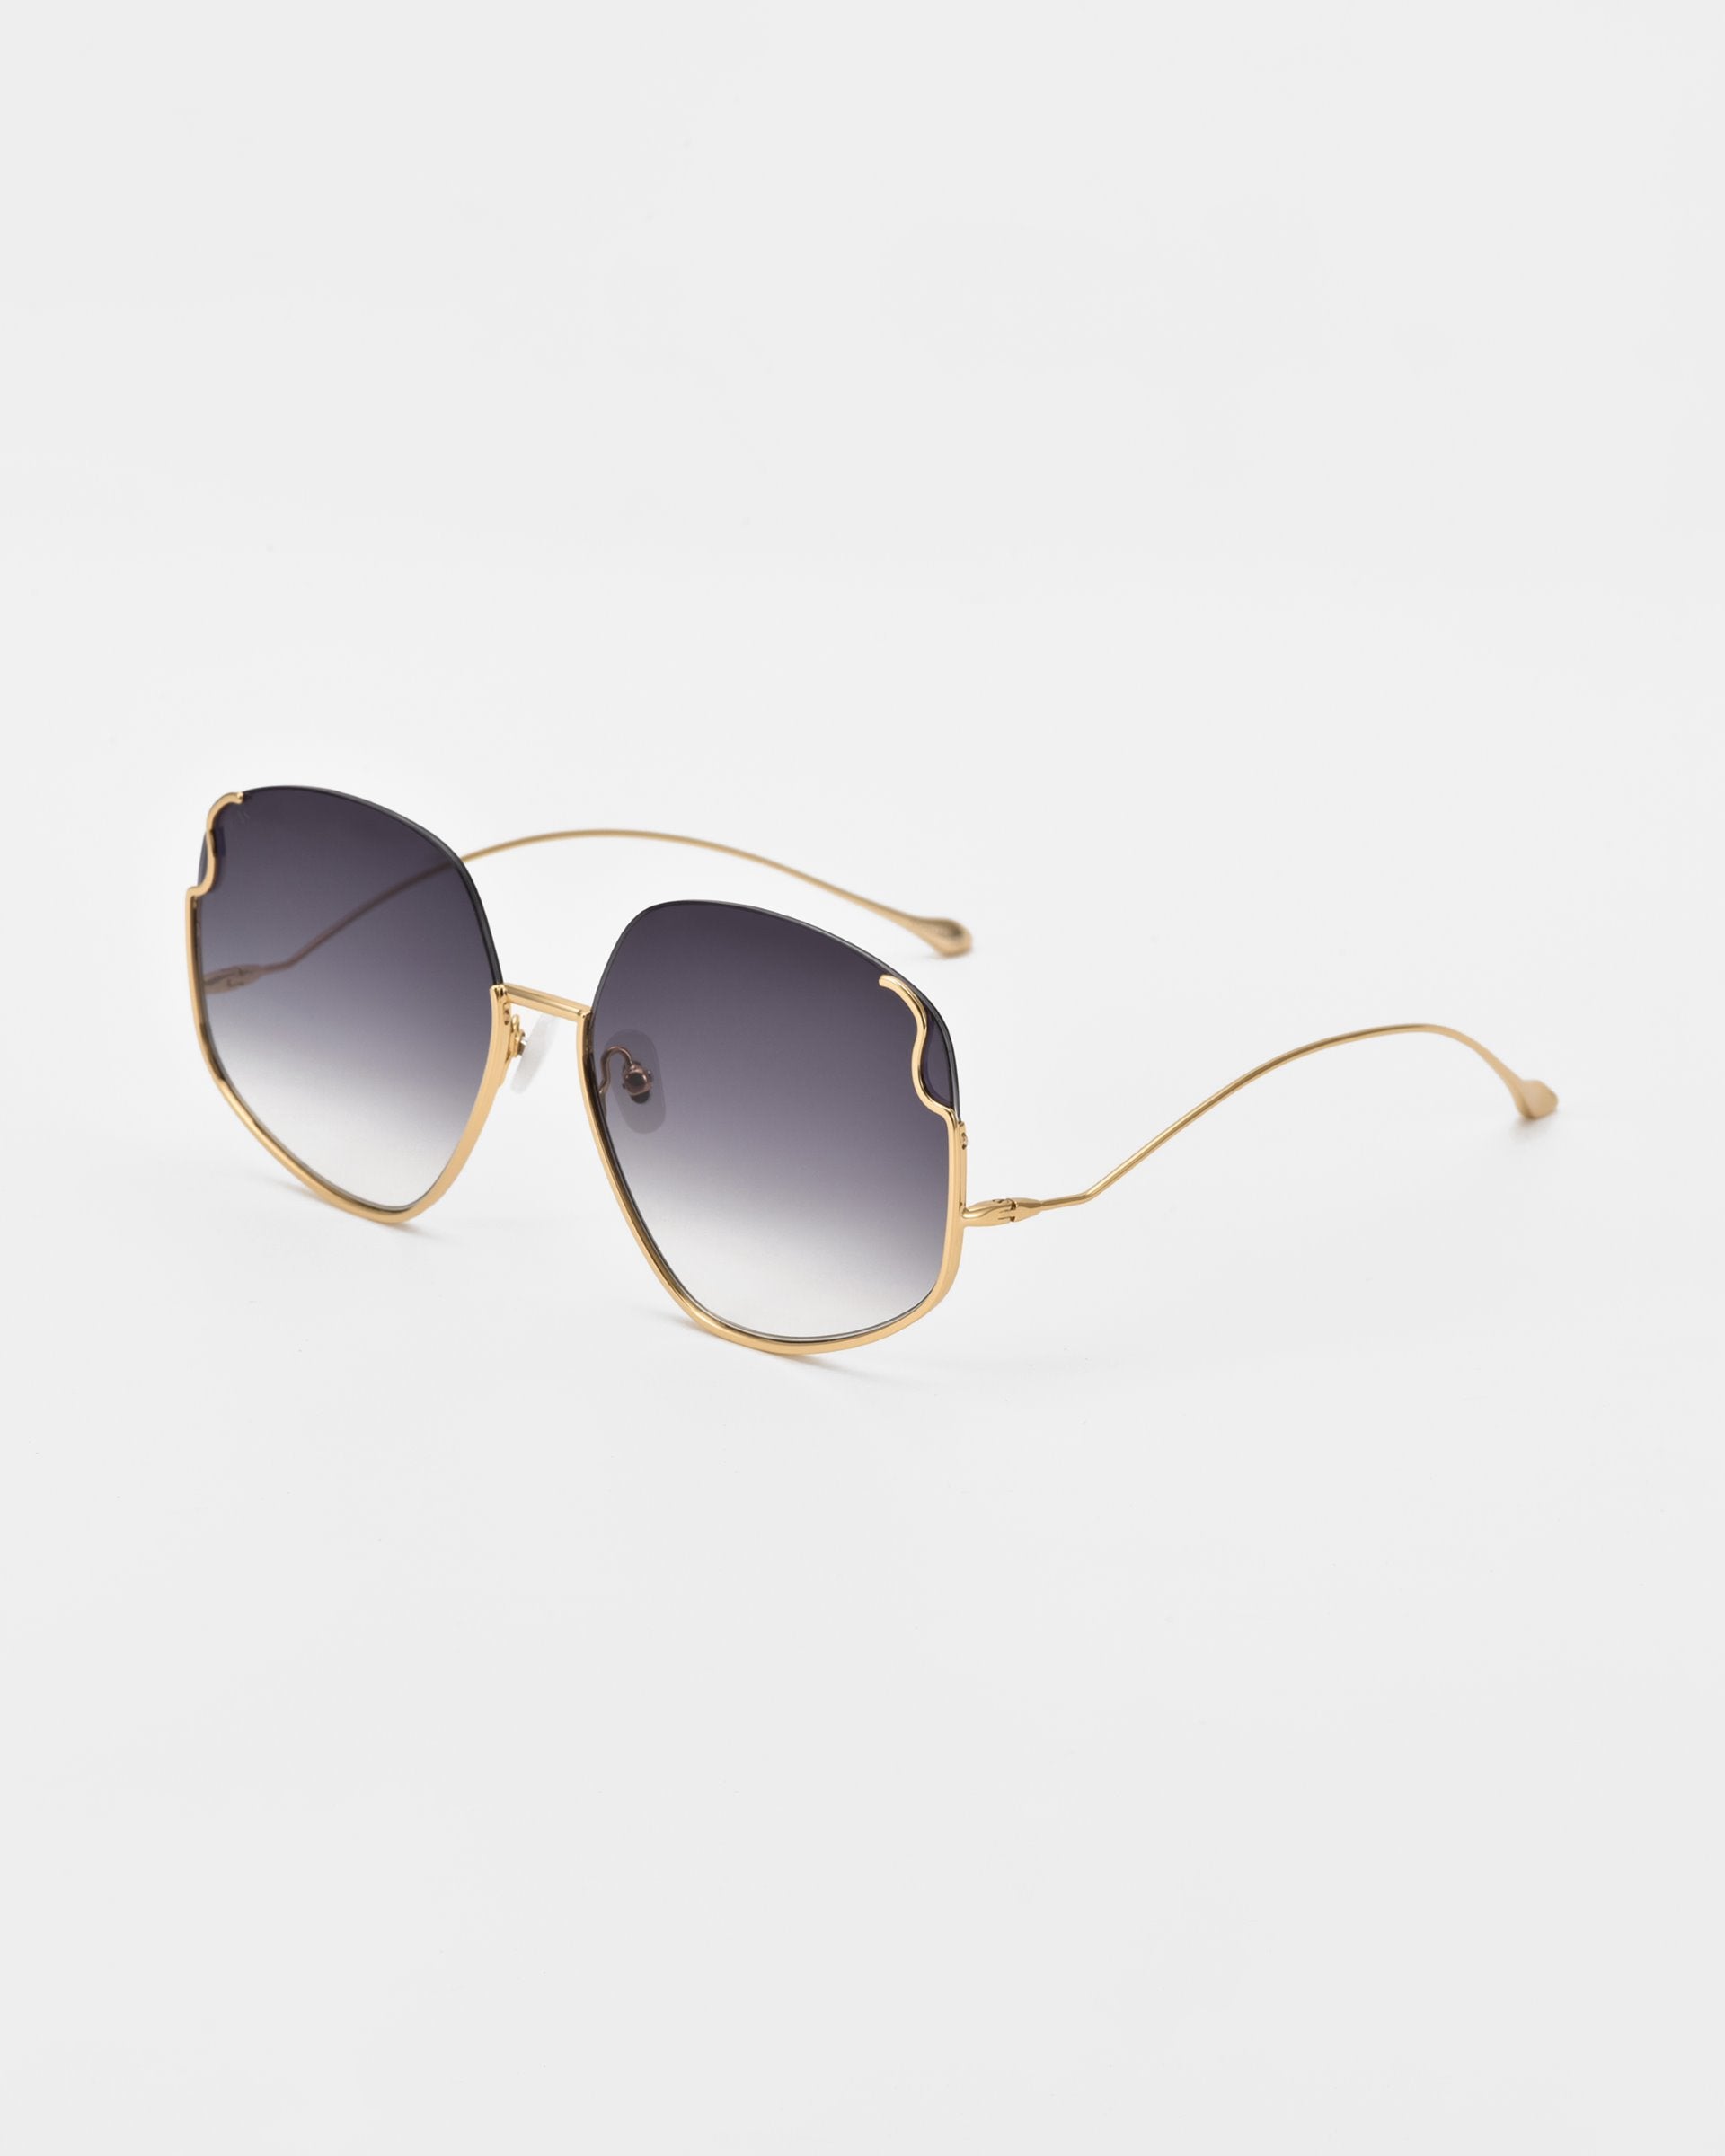 A pair of luxurious For Art's Sake® Drape sunglasses with gold metal frames and dark gradient lenses. The frames feature intricate metal detailing and a unique, slightly irregular shape at the top edges. The elegant arms are thin and curve towards the back ends, where there are small, rounded tips. These sunglasses are set against a plain white background.